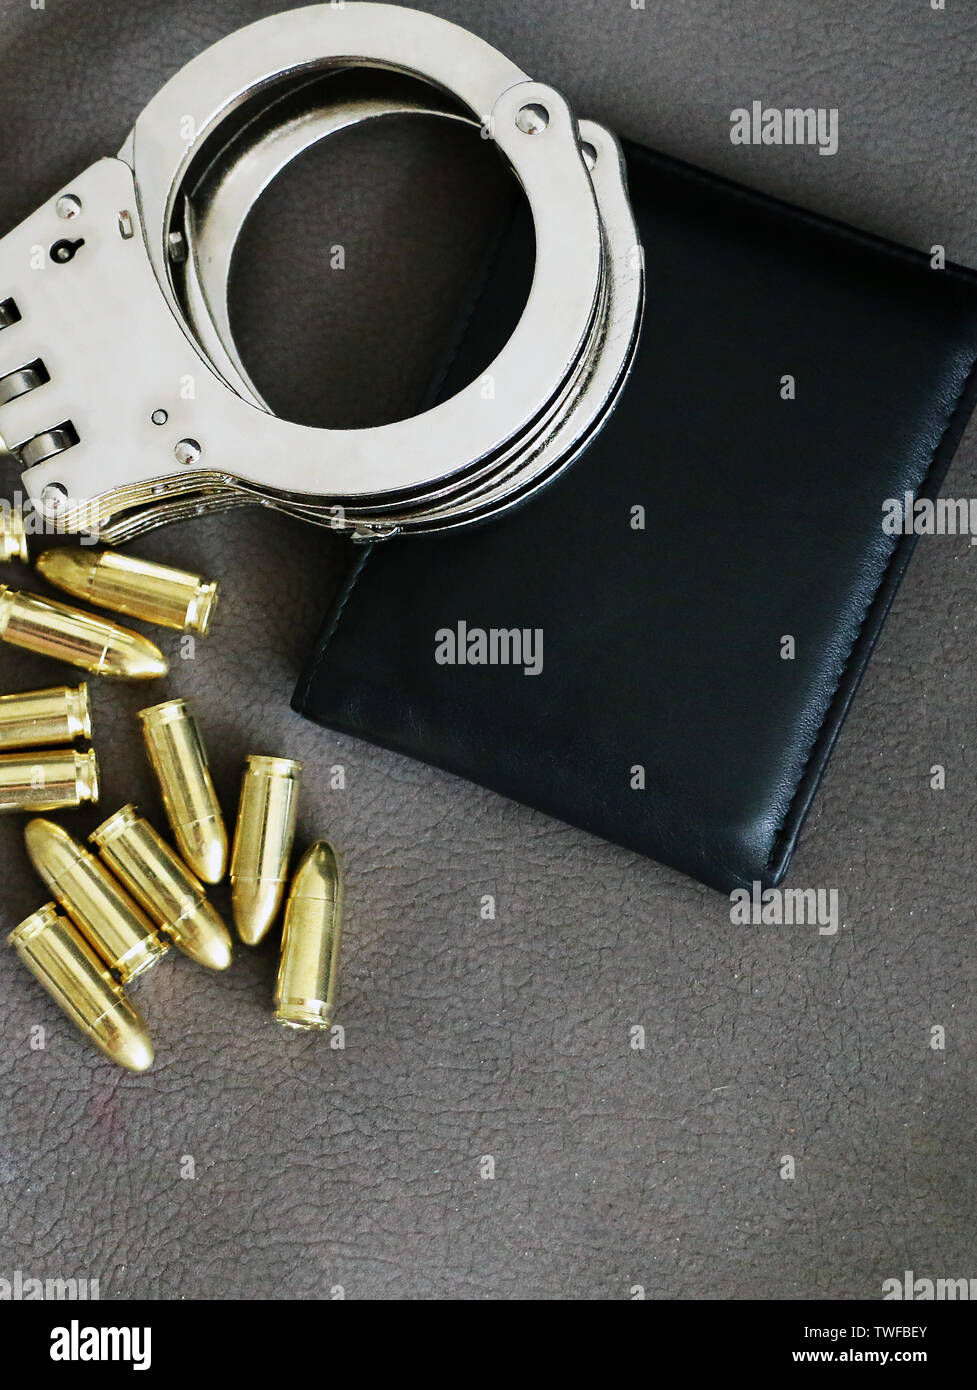 Handcuffs, pistol bullets and ID holder for cops, special forces and defense units equipment. Close up background. Stock Photo